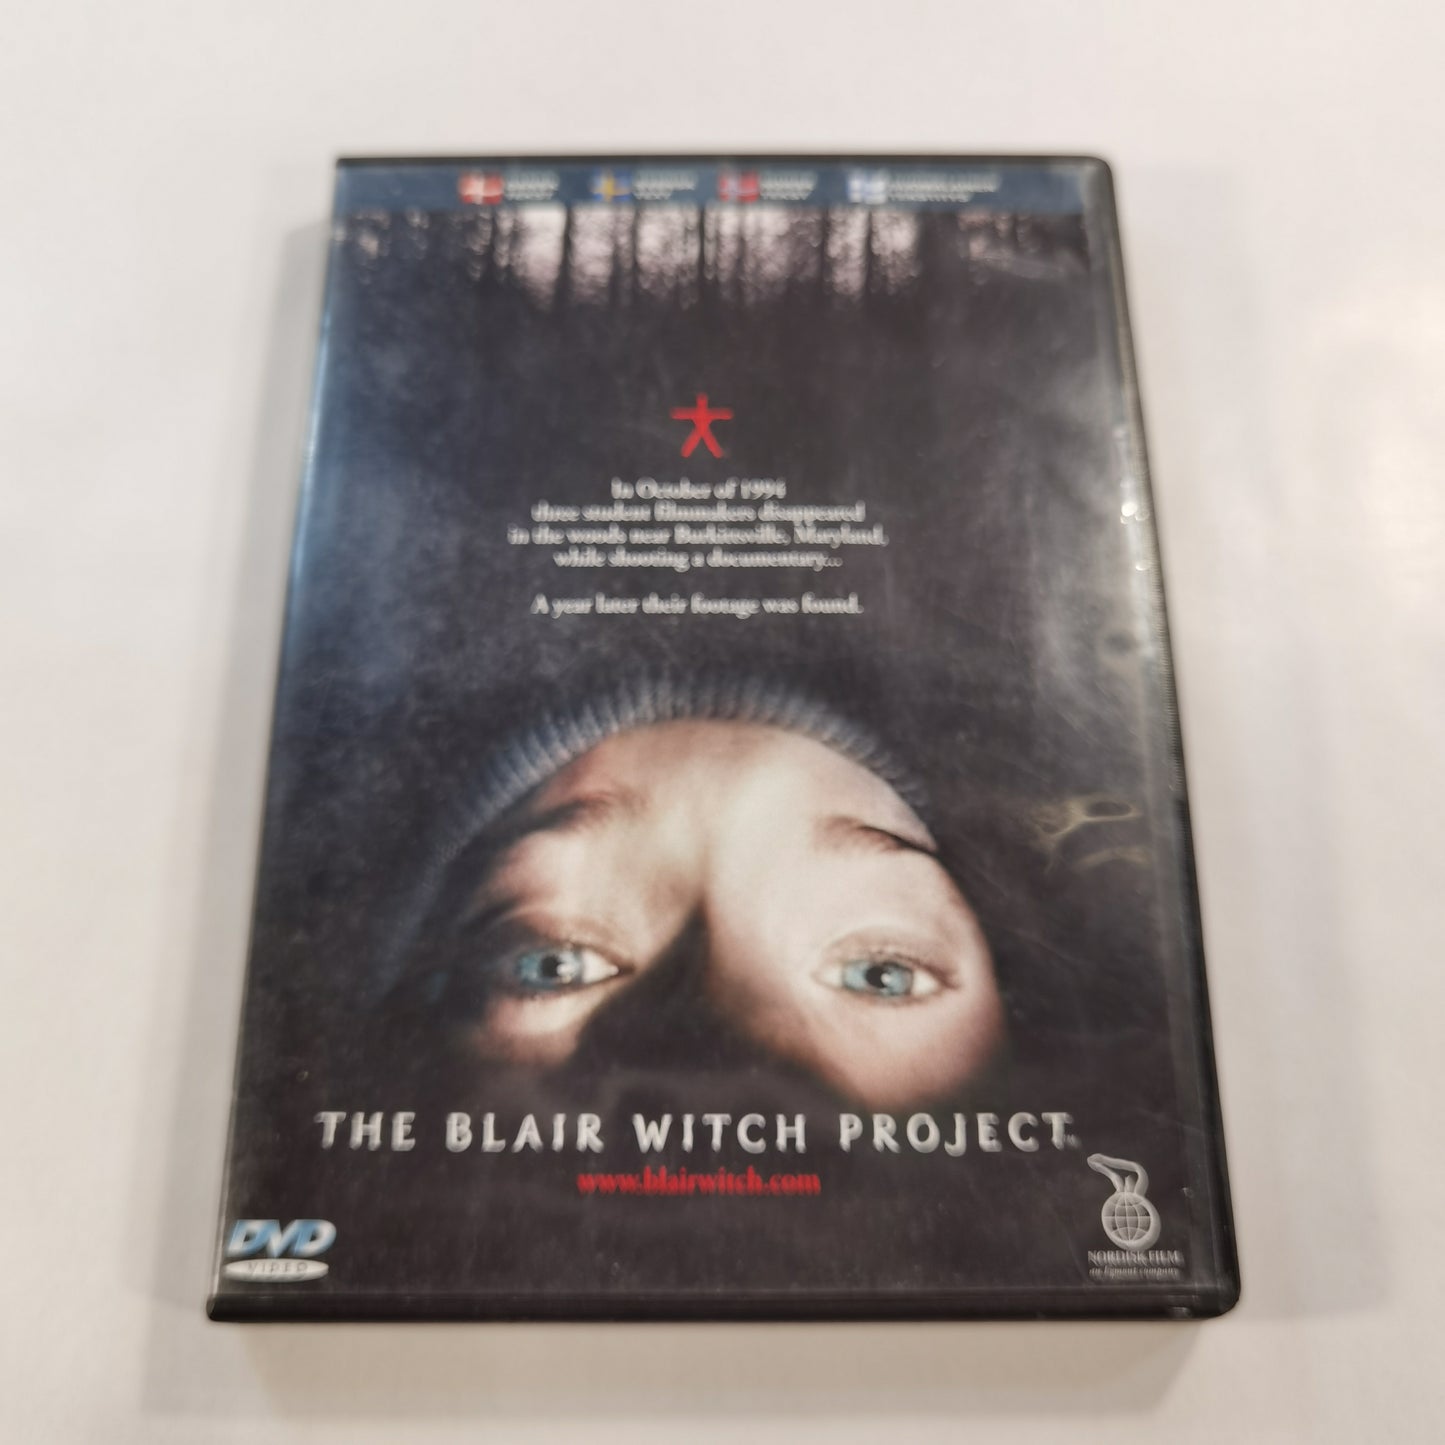 The Blair Witch Project (1999) - DVD SE NO DK FI 1999